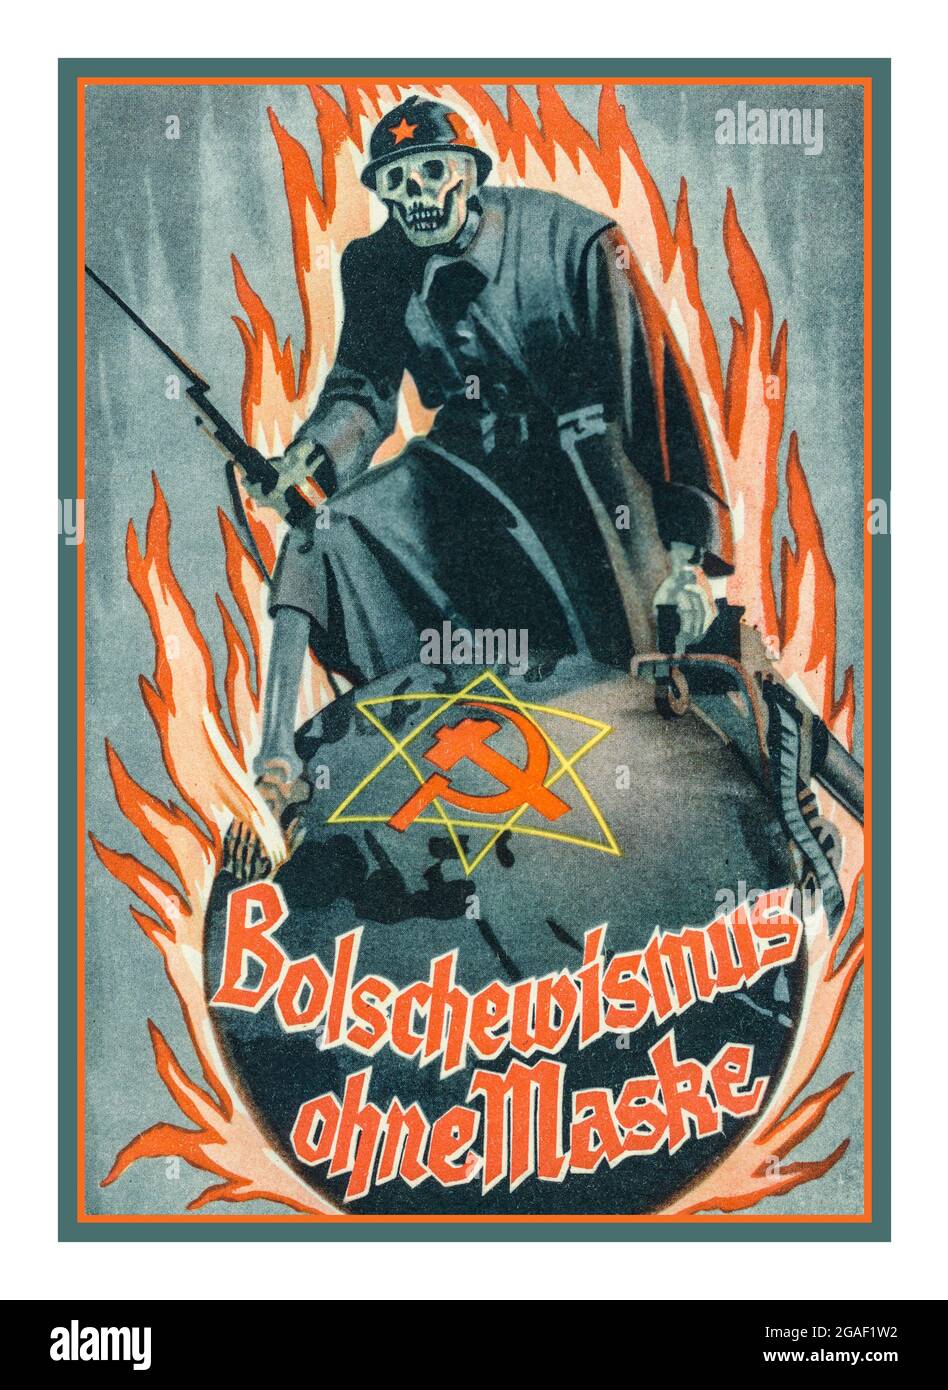 1930s Nazi Germany anti-communist racist Soviet Russian USSR  Bolshevik election propaganda 'Bolschewismus ohne maske'   'Bolshevism without a mask' illustrating a deaths head Russian Soviet Soldier dominating a burning world by force with Hammer and Sickle Symbol entwined with Jewish Star of David Stock Photo